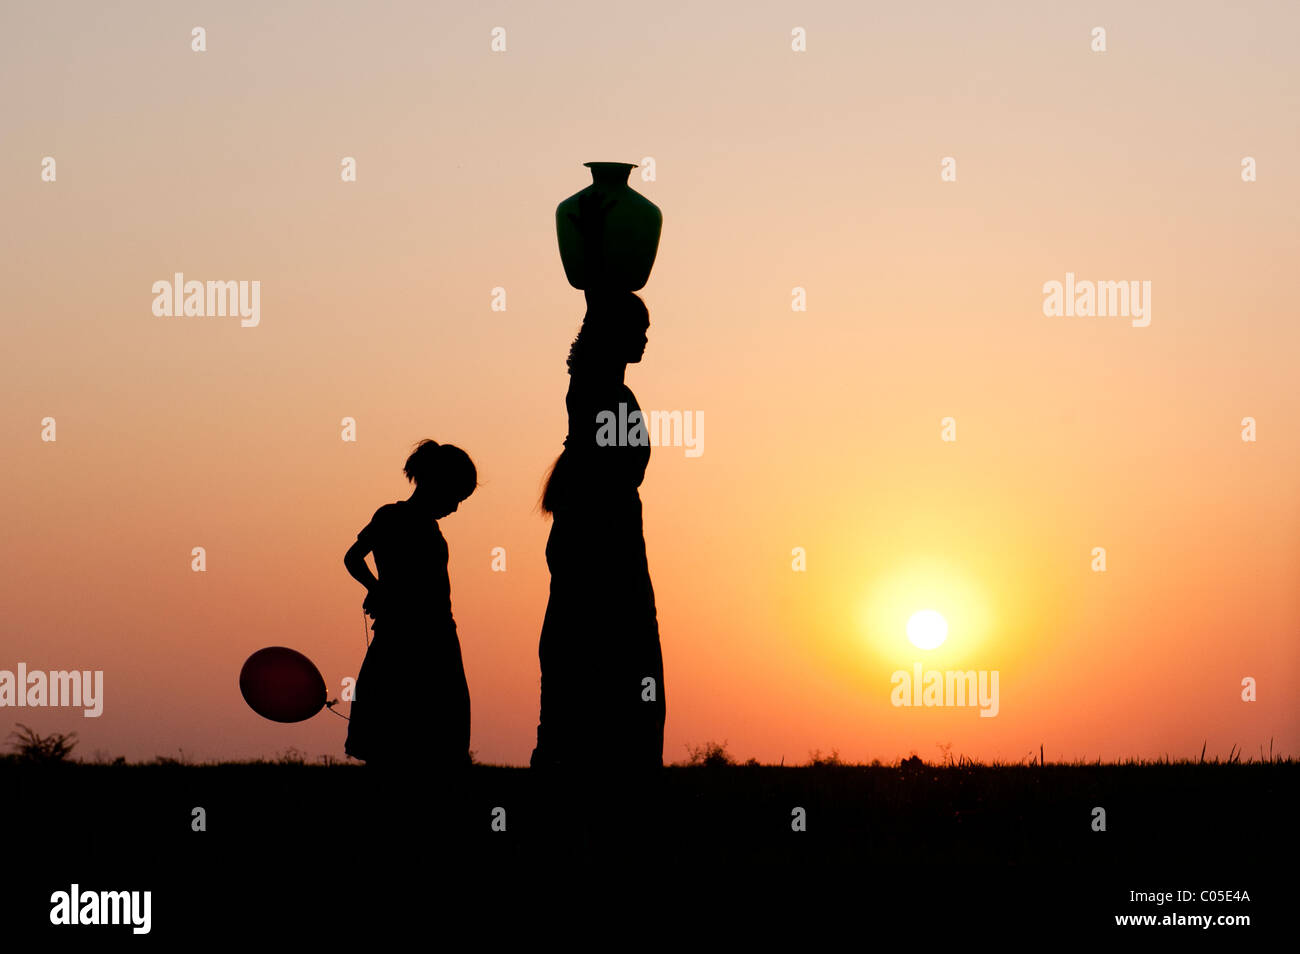 Indian mother carrying water pot with child and balloons in the indian countryside. Silhouette Stock Photo